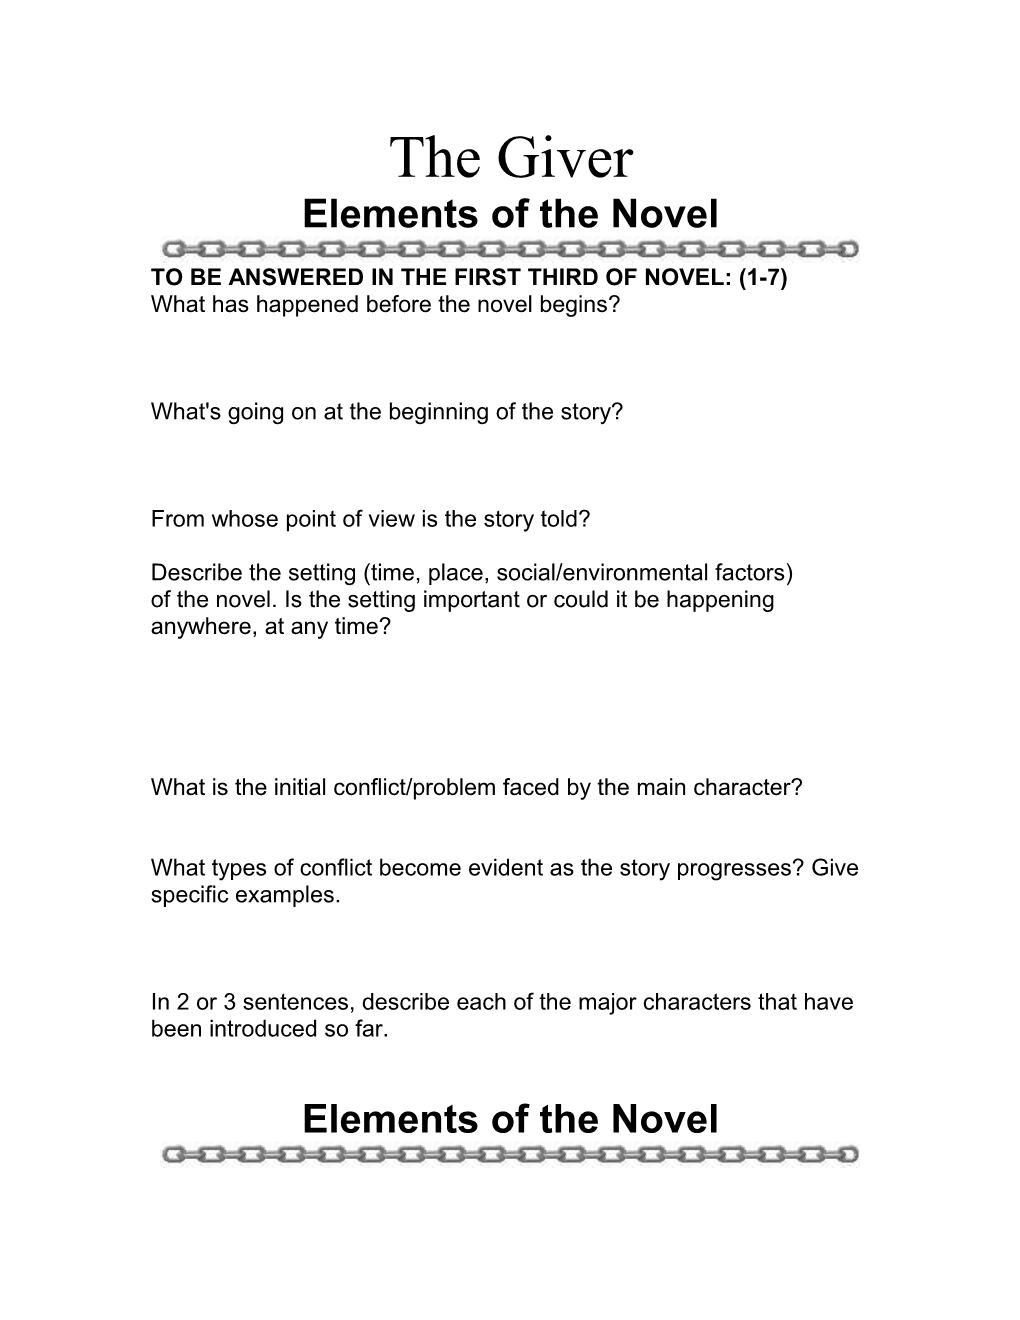 The Giver: Elements of the Novel